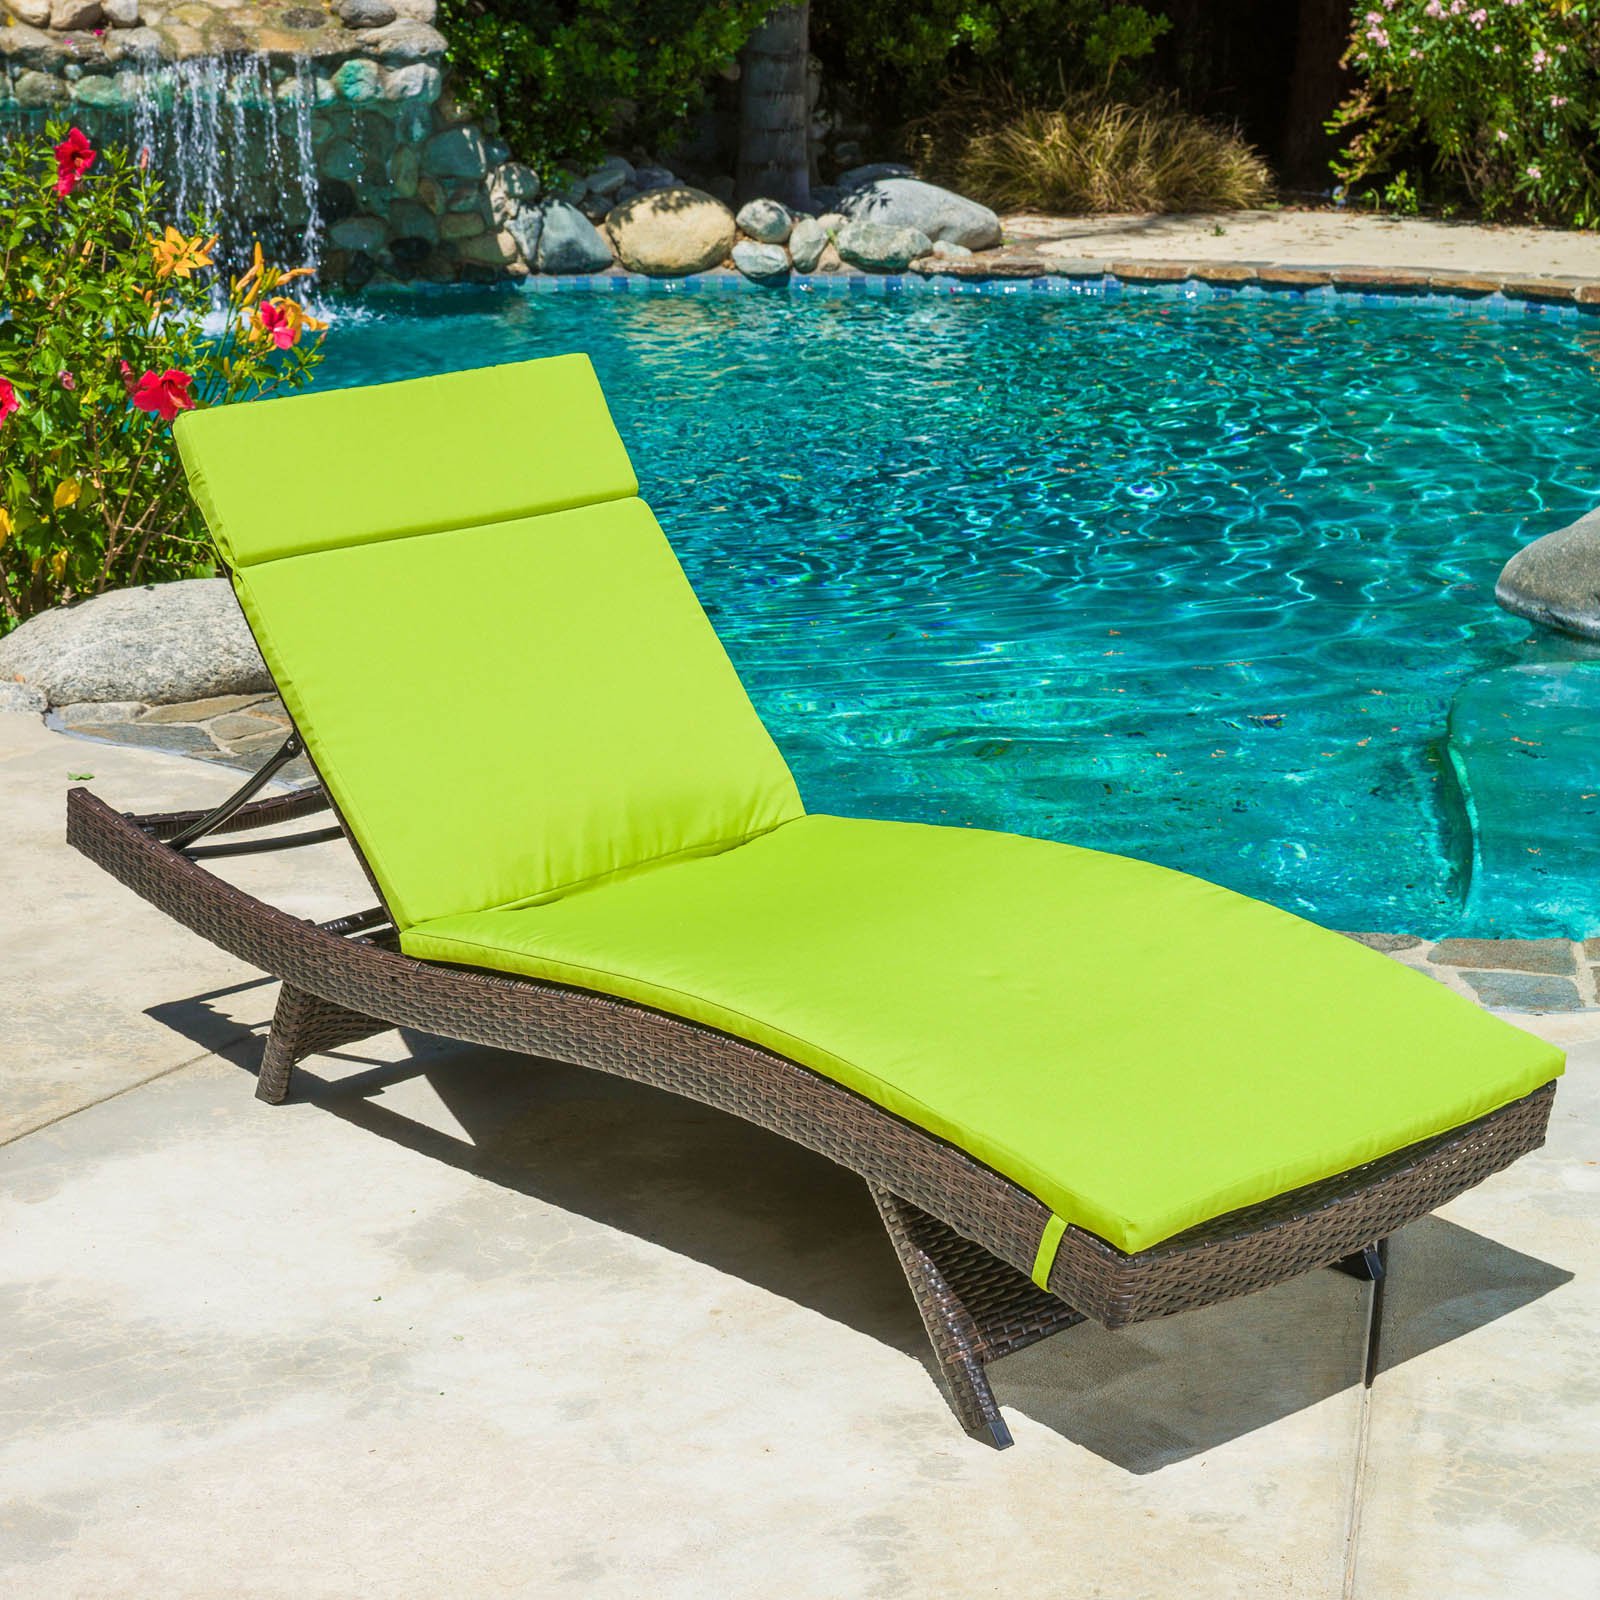 Outdoor Adjustable Chaise Lounge with Colored Cushion - image 2 of 2